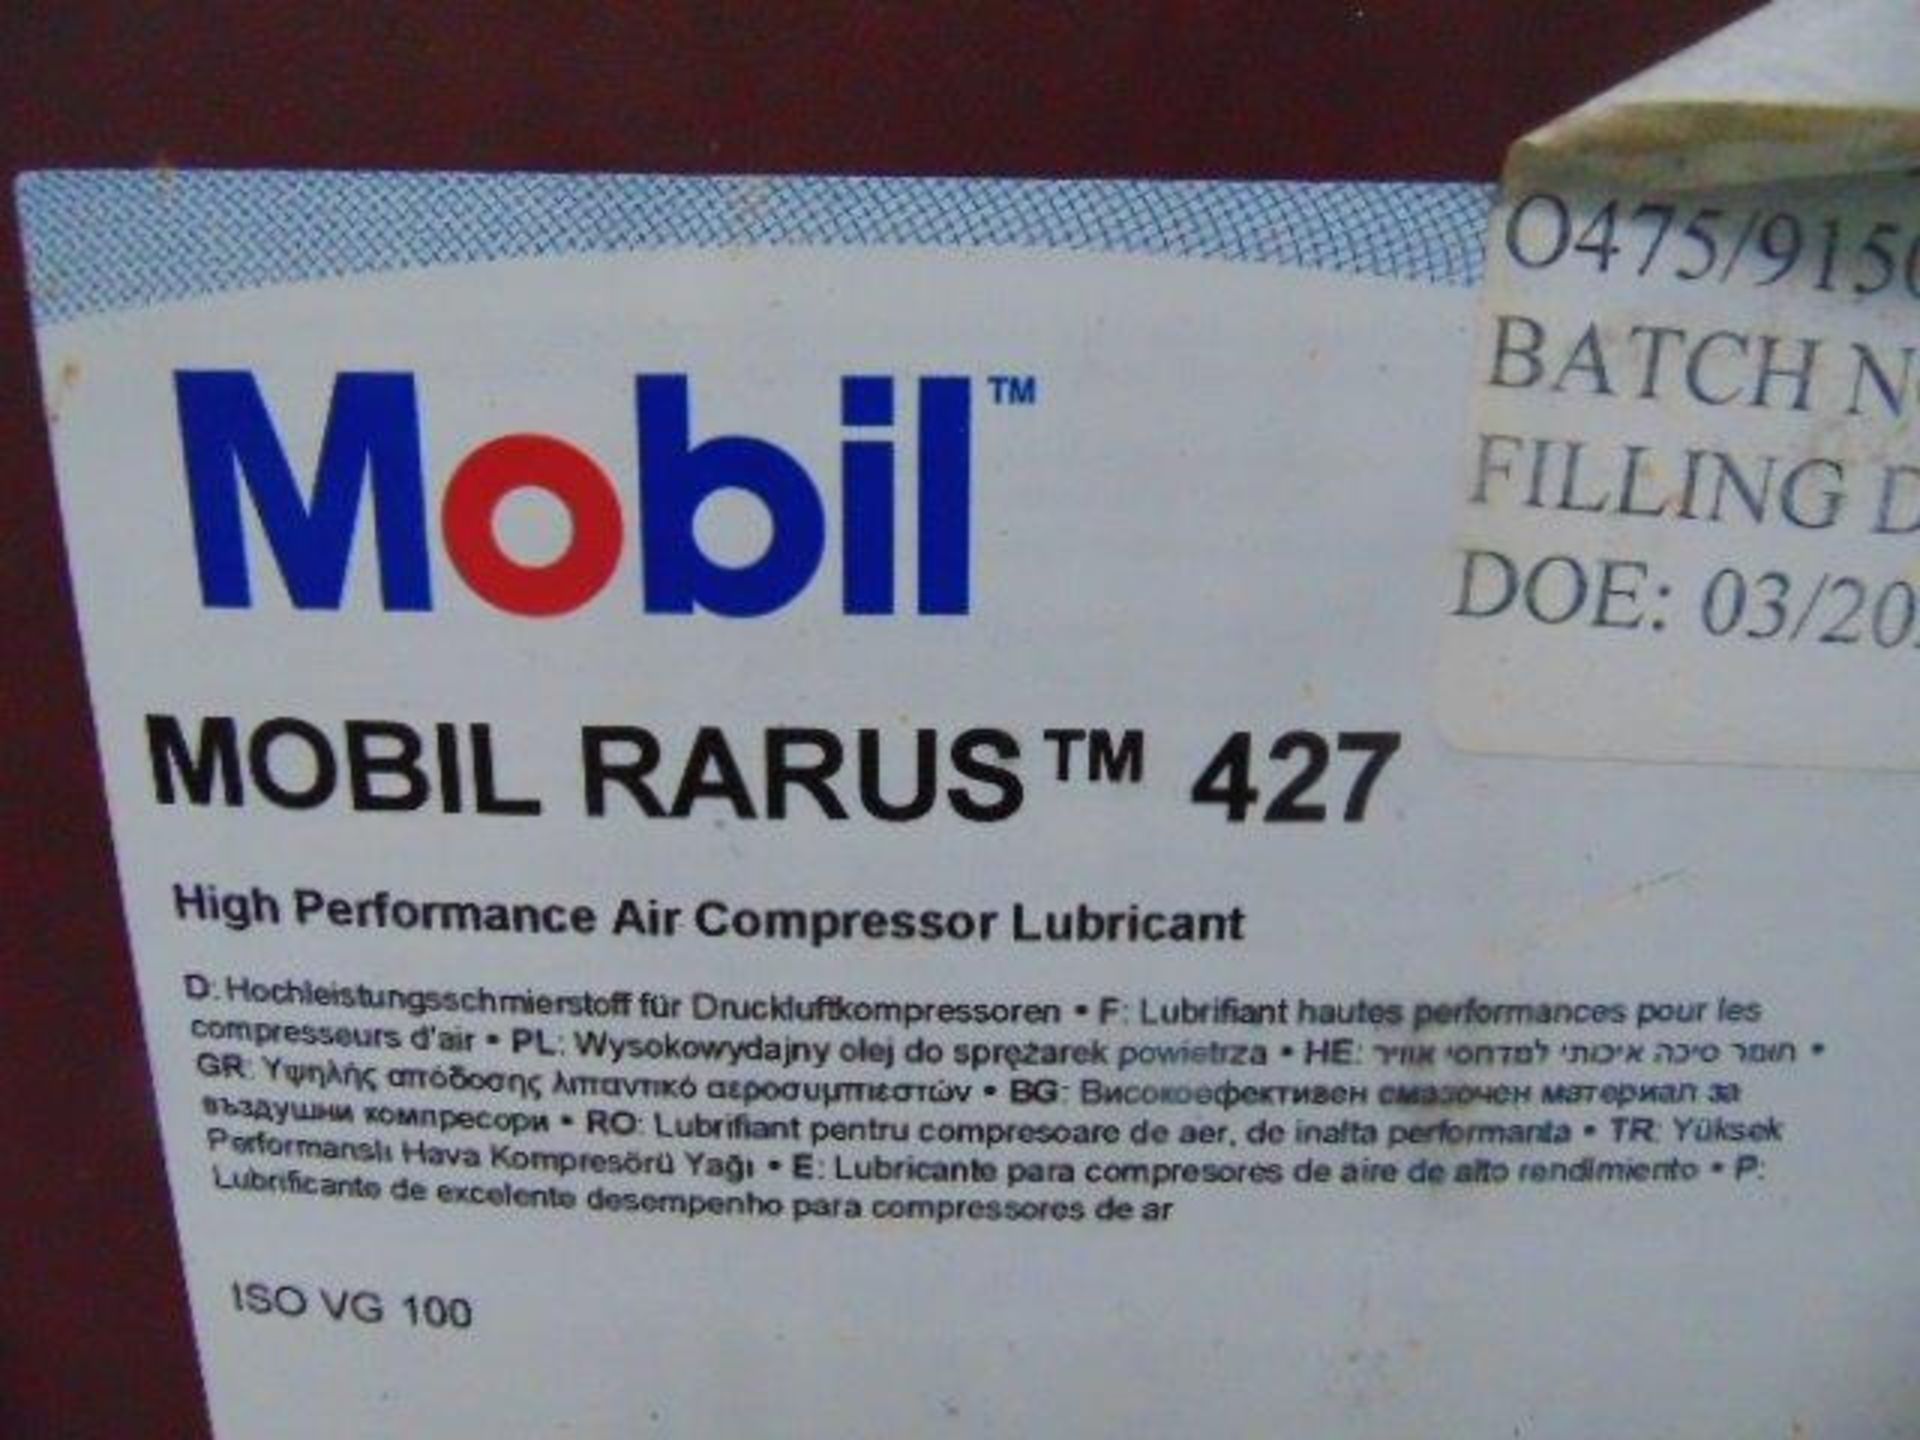 15 x Unissued 20L Drums of Mobil Rarus 427 Air Compressor Lubricant / Oil - Image 4 of 4